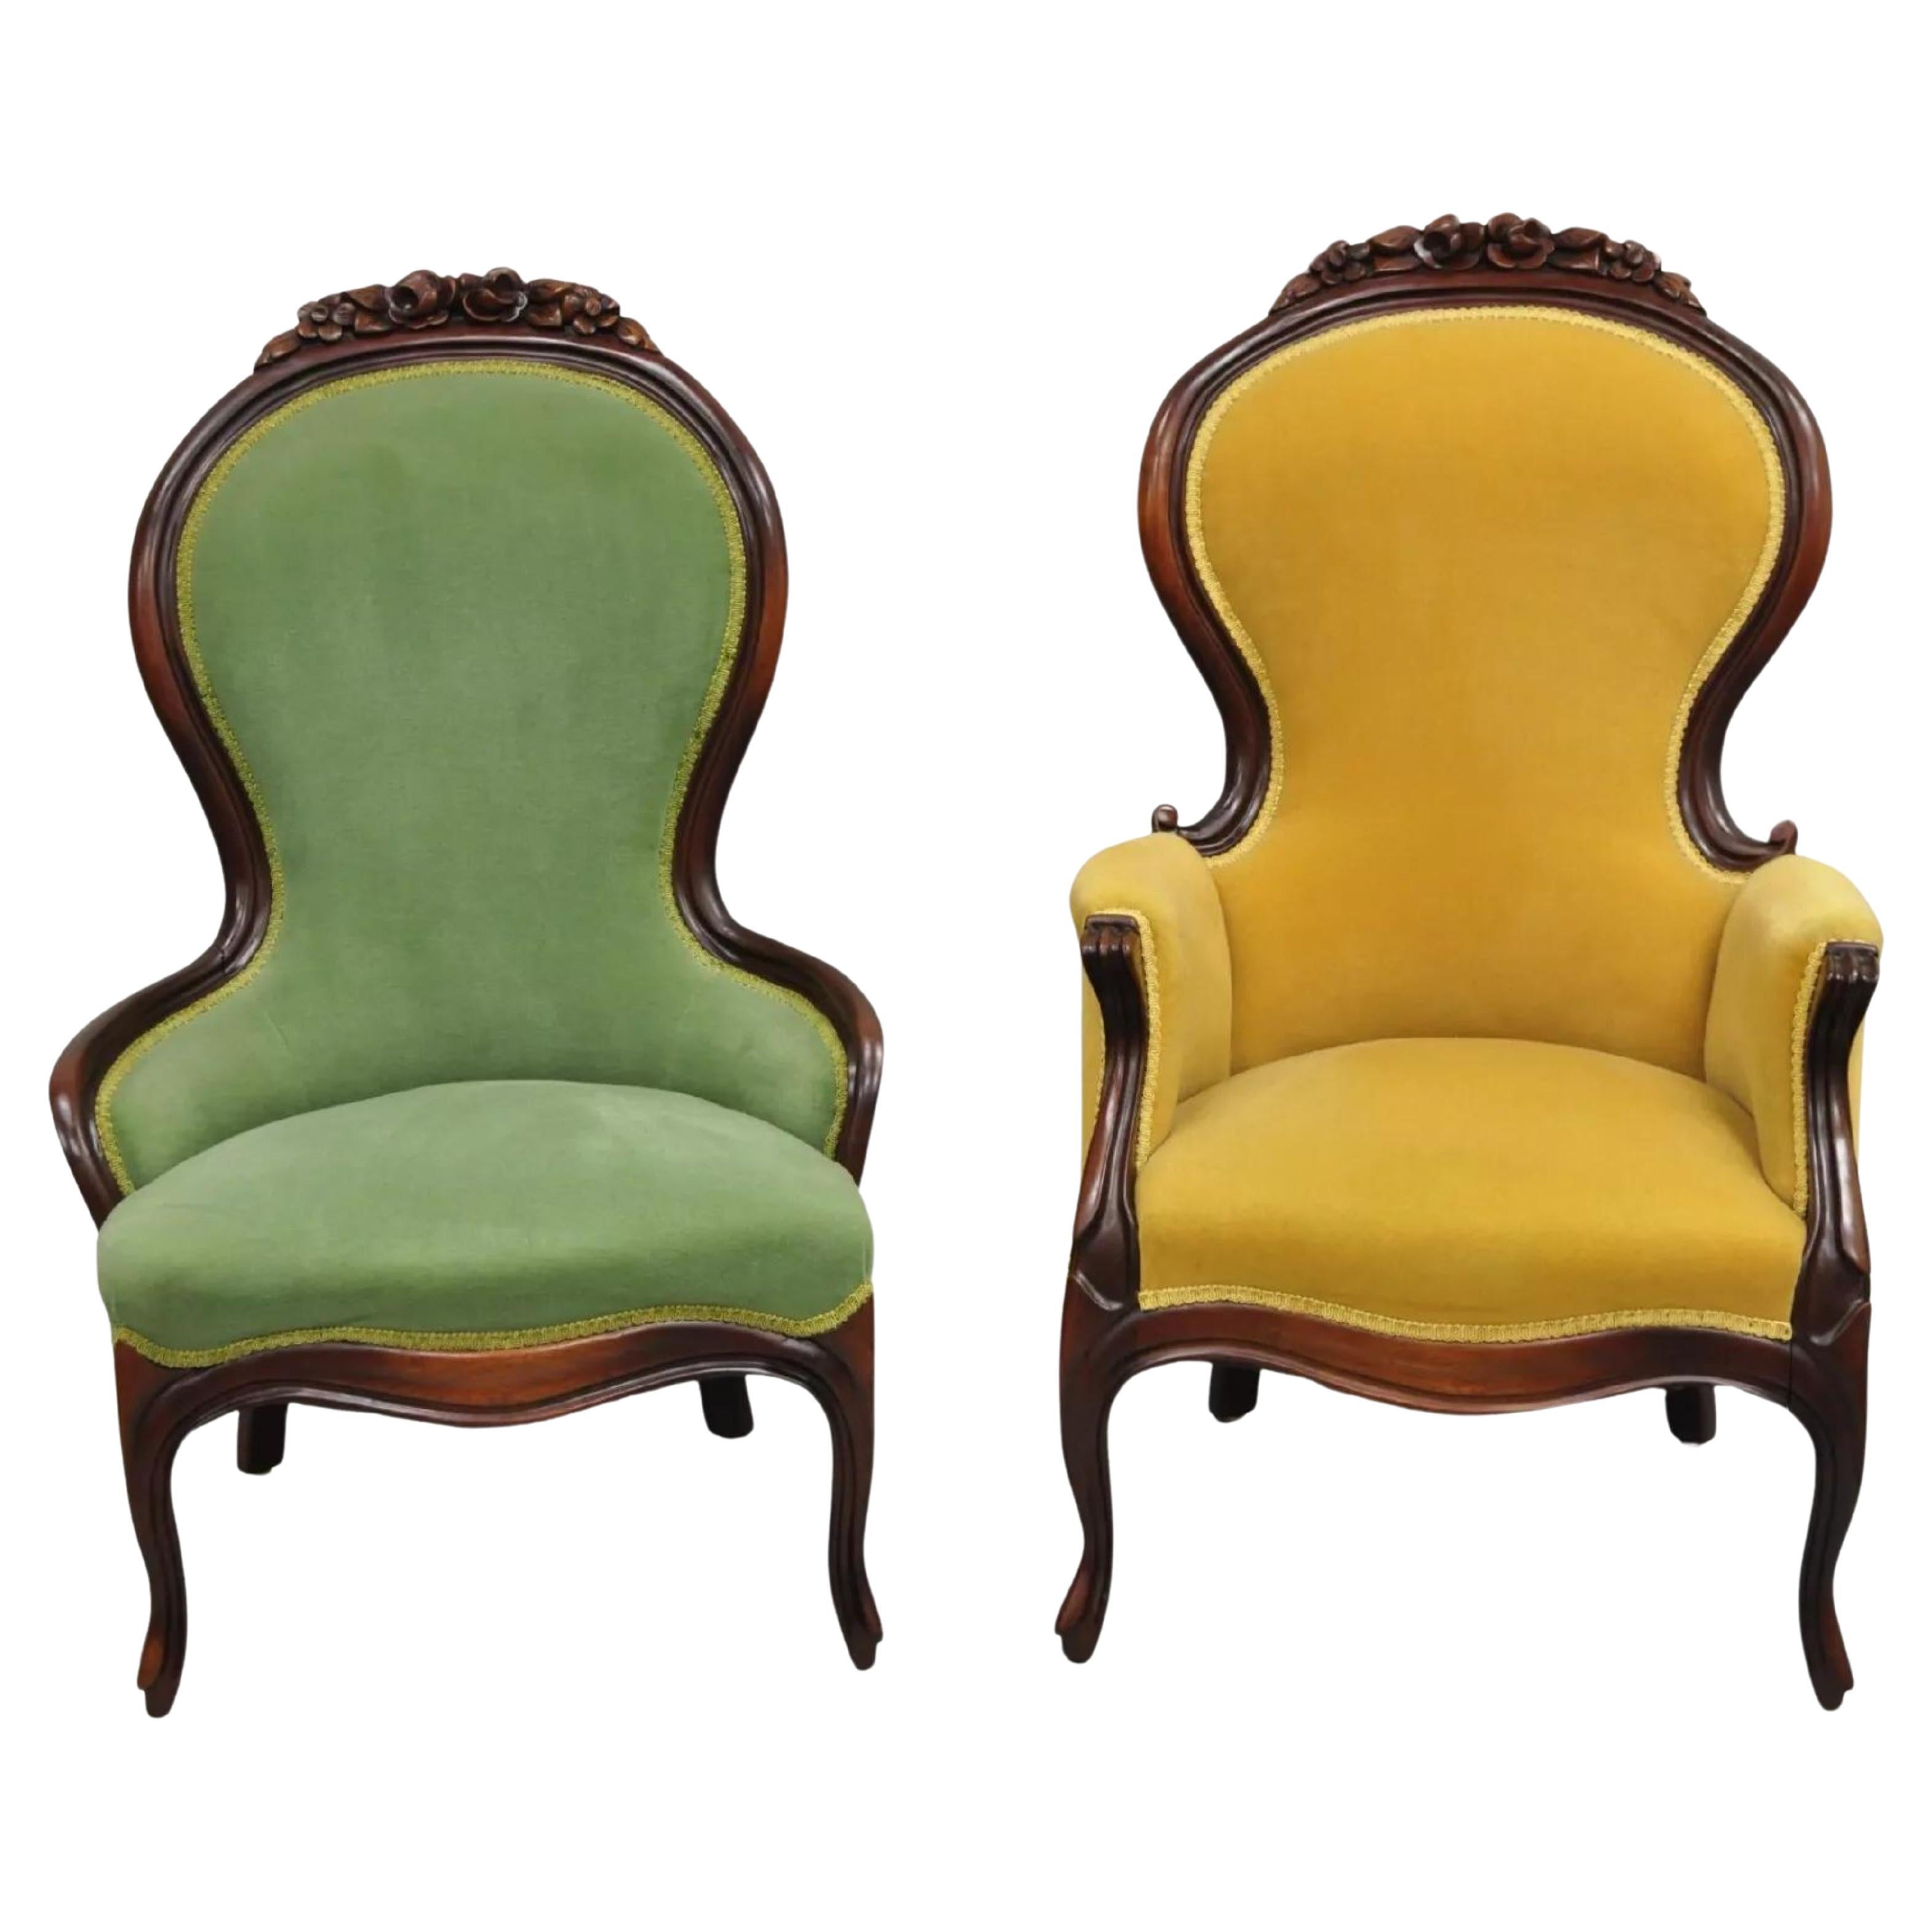 Vintage Victorian Green & Yellow His & Hers Rose Carved Parlor Chairs - a Pair For Sale